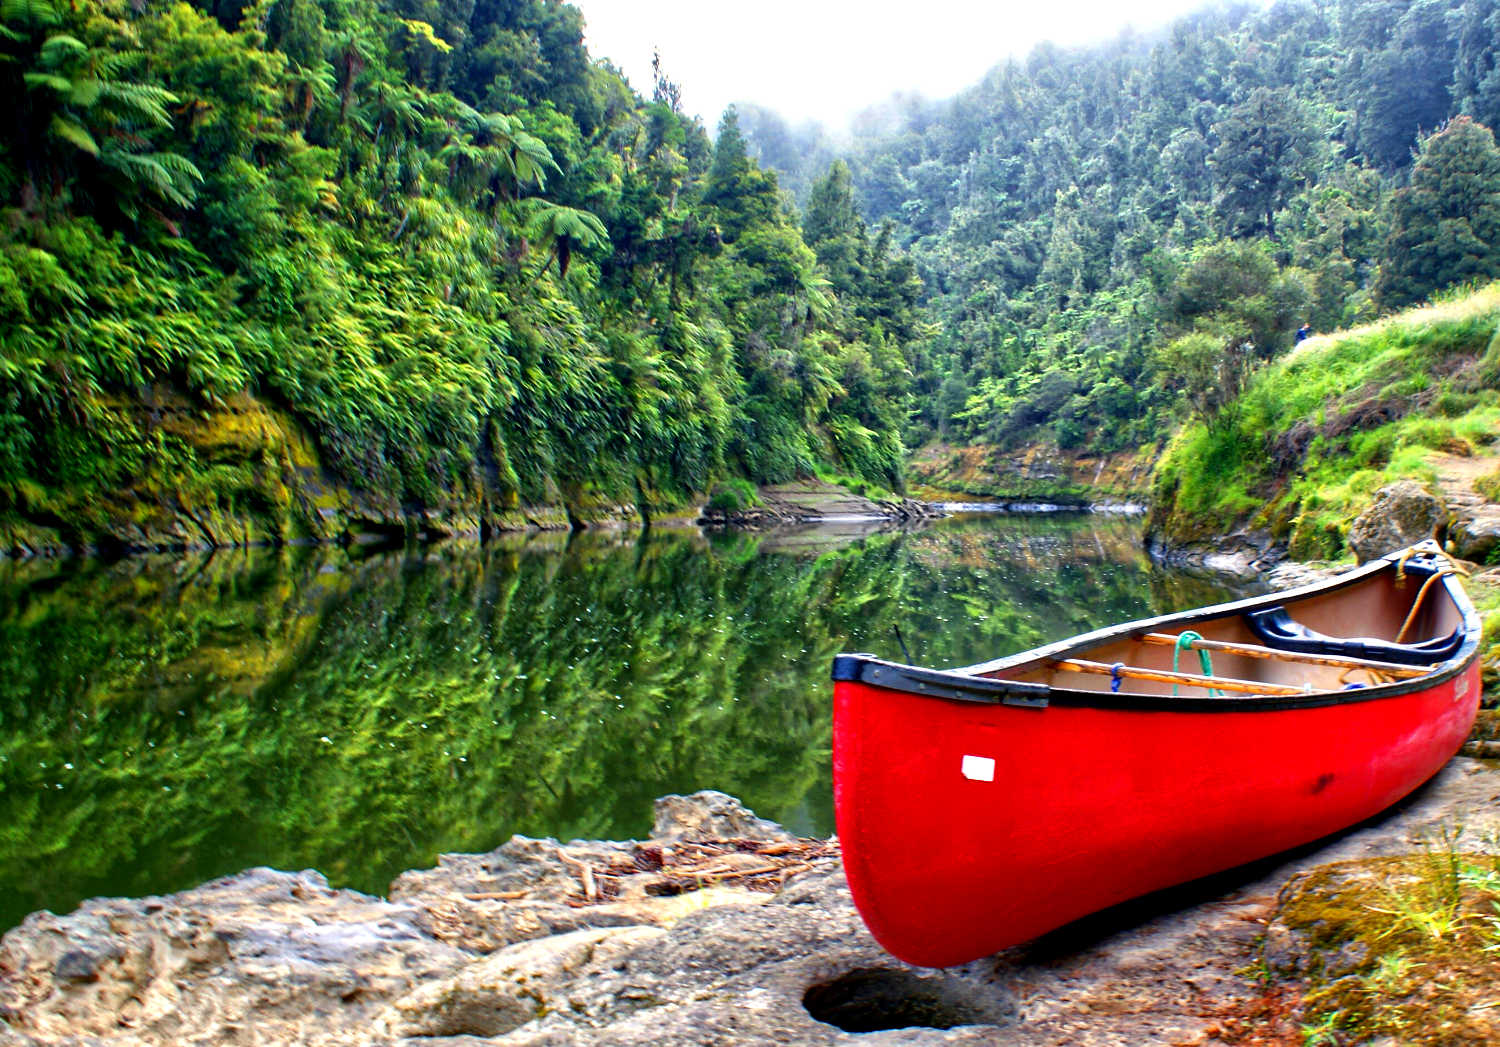 An early morning photo of a canoe on the bank of the Whanganui river, New Zealand